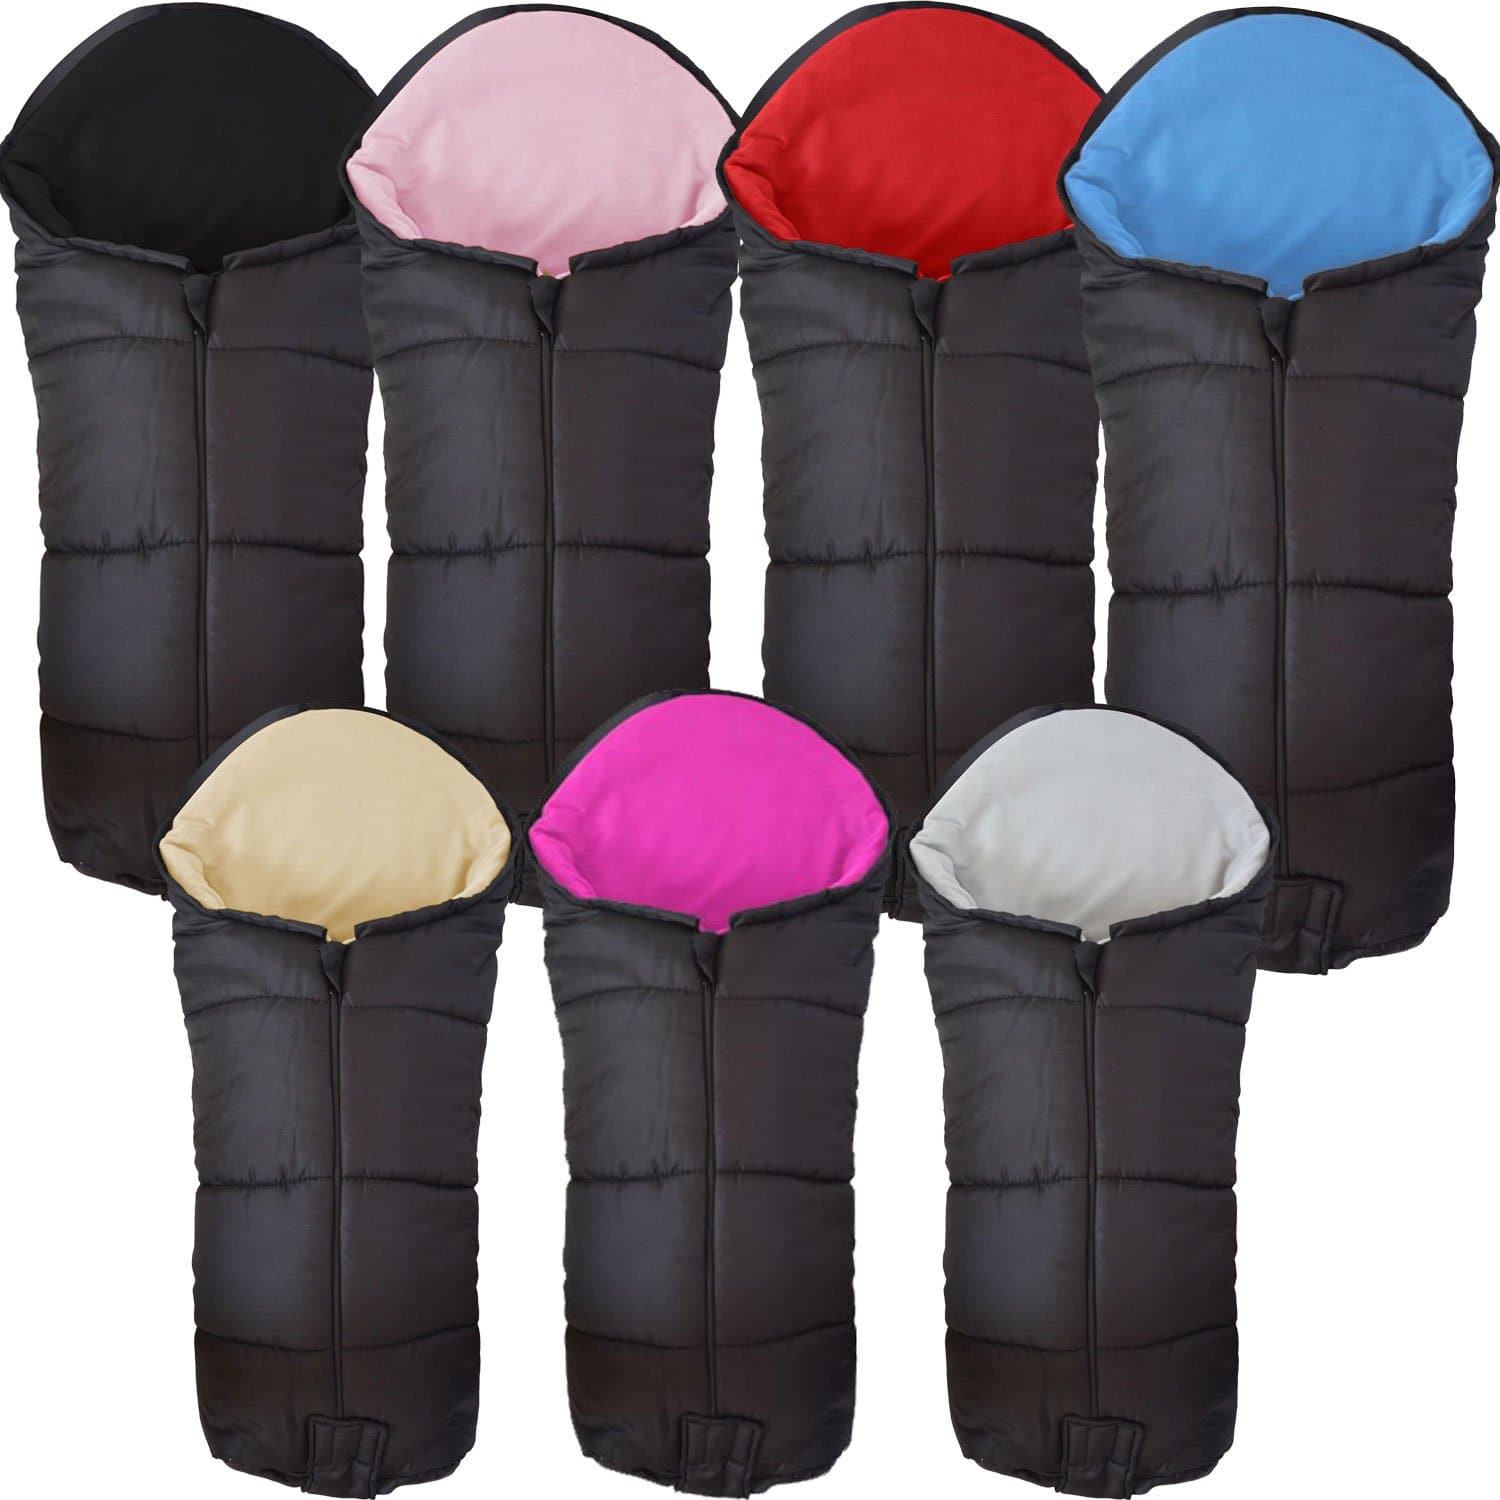 Universal Deluxe Pushchair Footmuff / Cosy Toes - Fits All Pushchairs / Prams And Buggies   